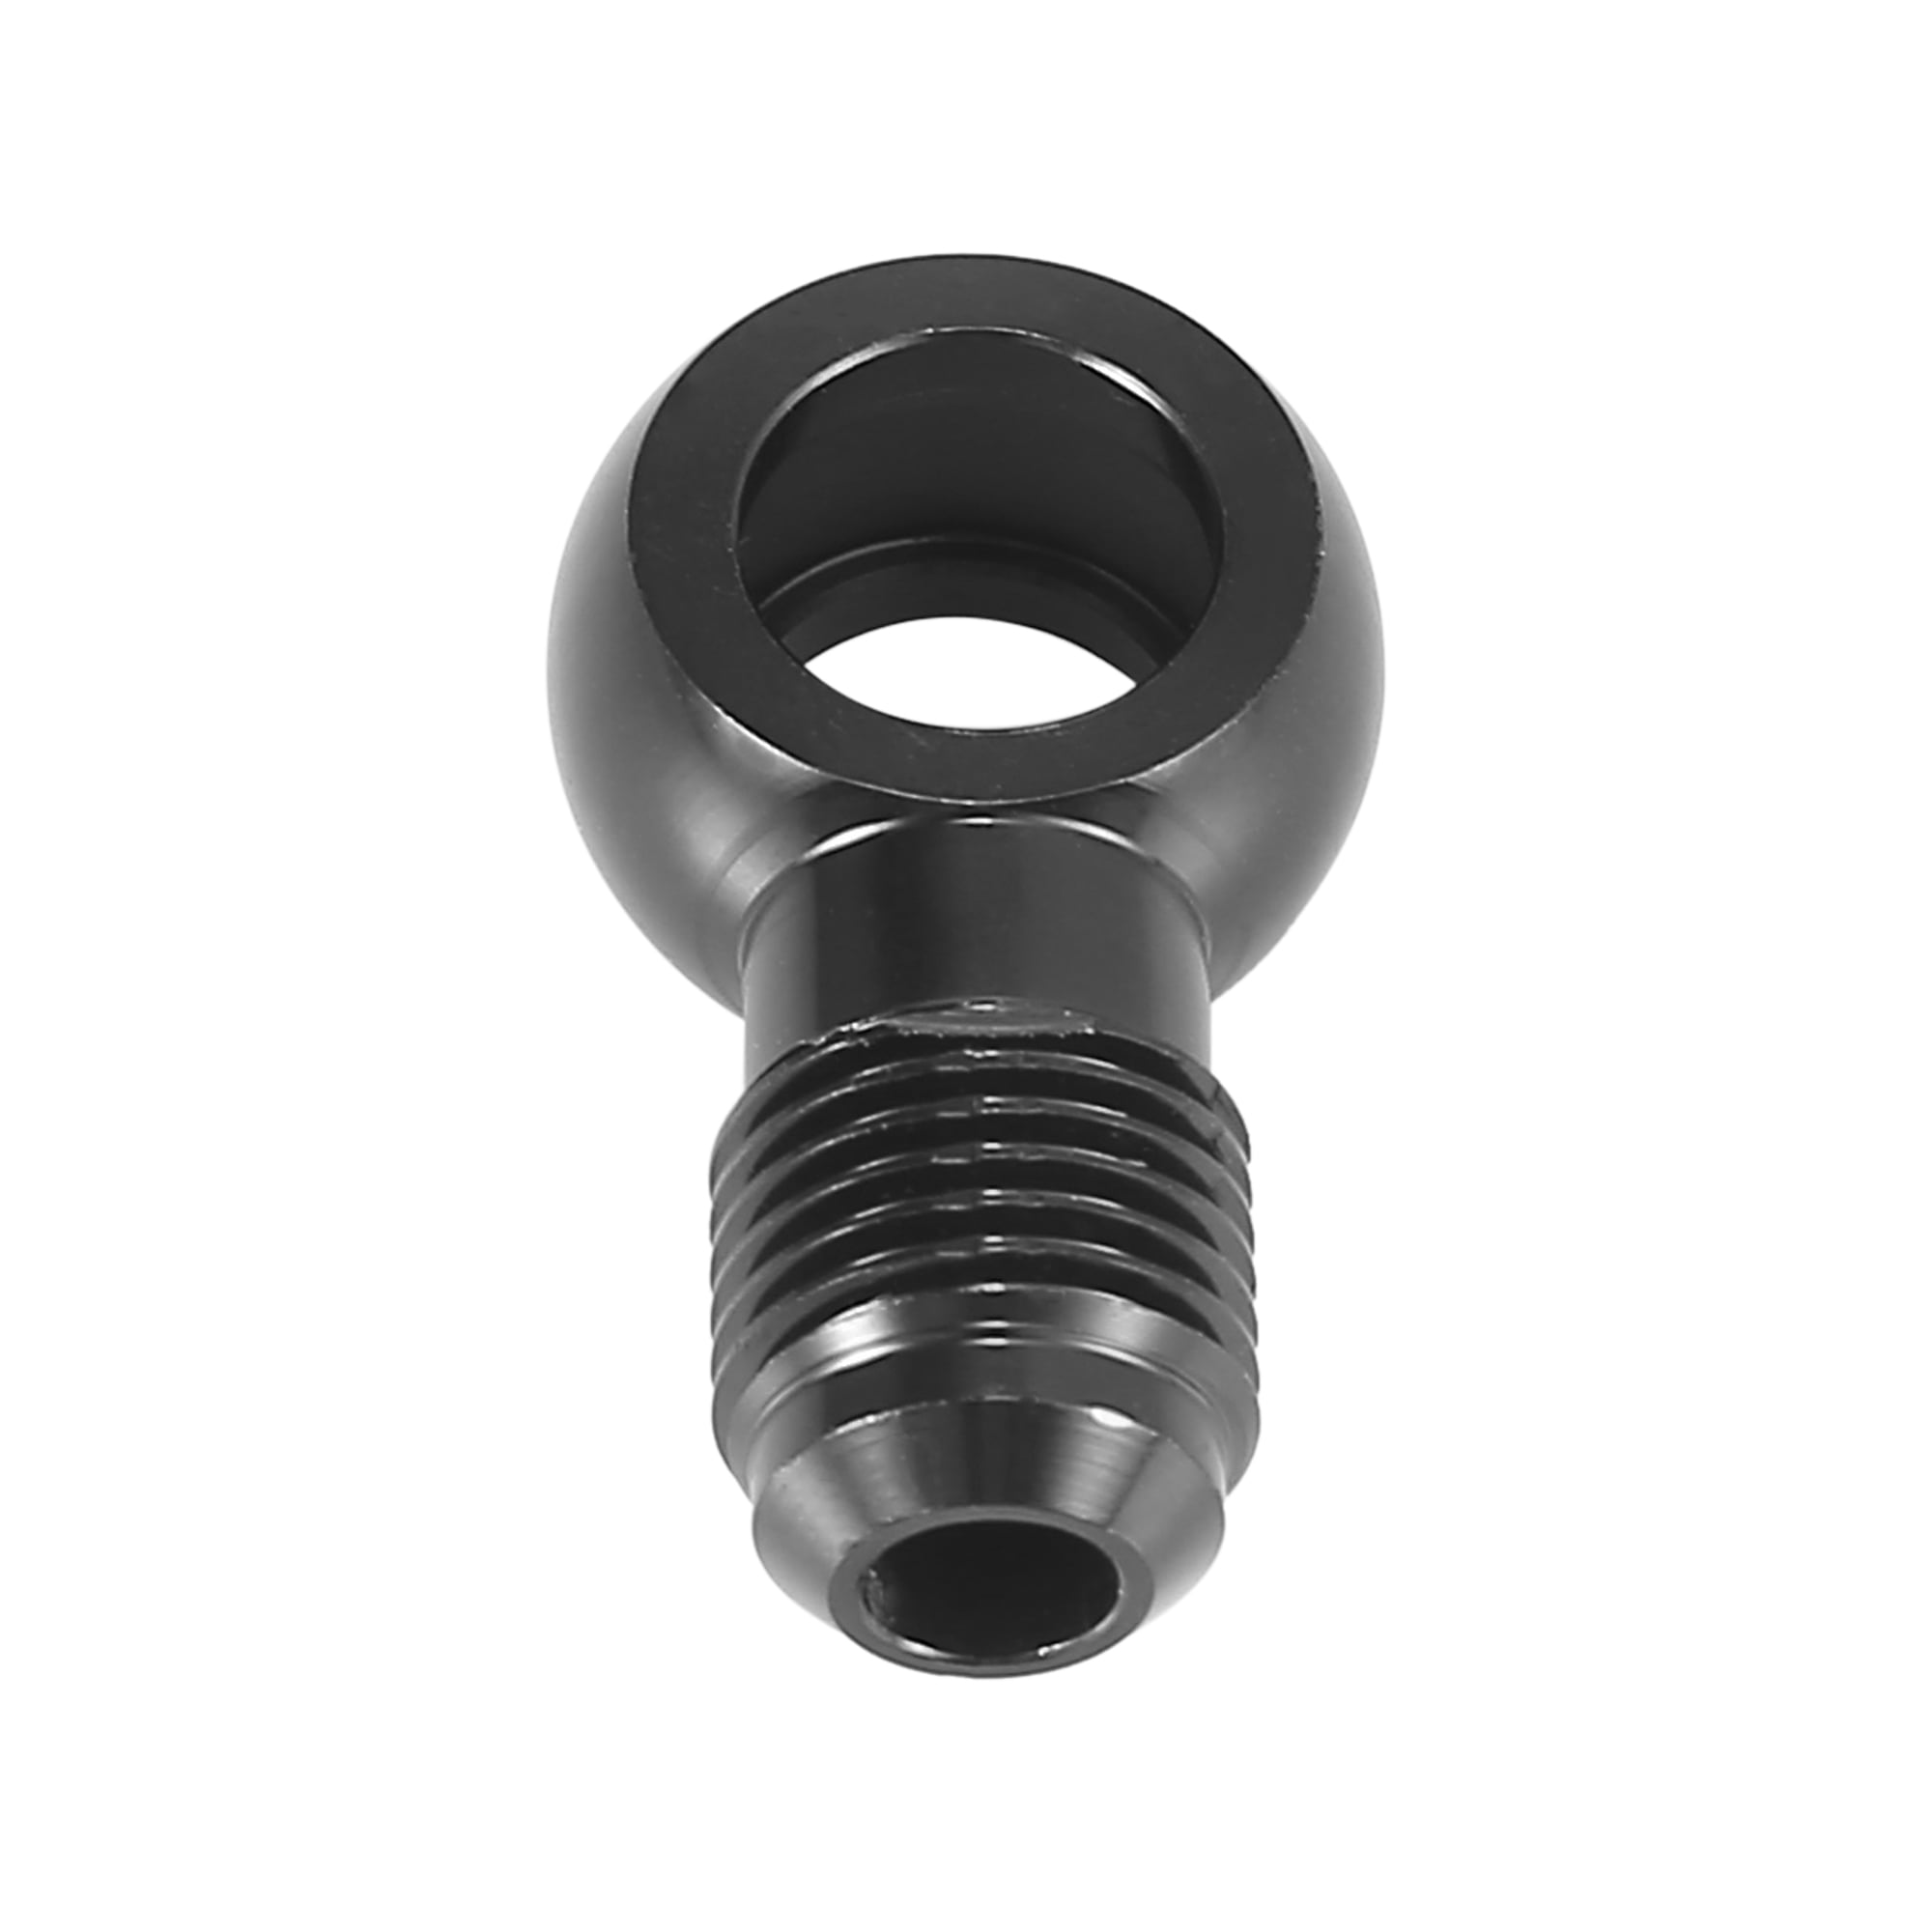 Aluminum Male Banjo Adapter Fitting 18 mm hole with AN10 male